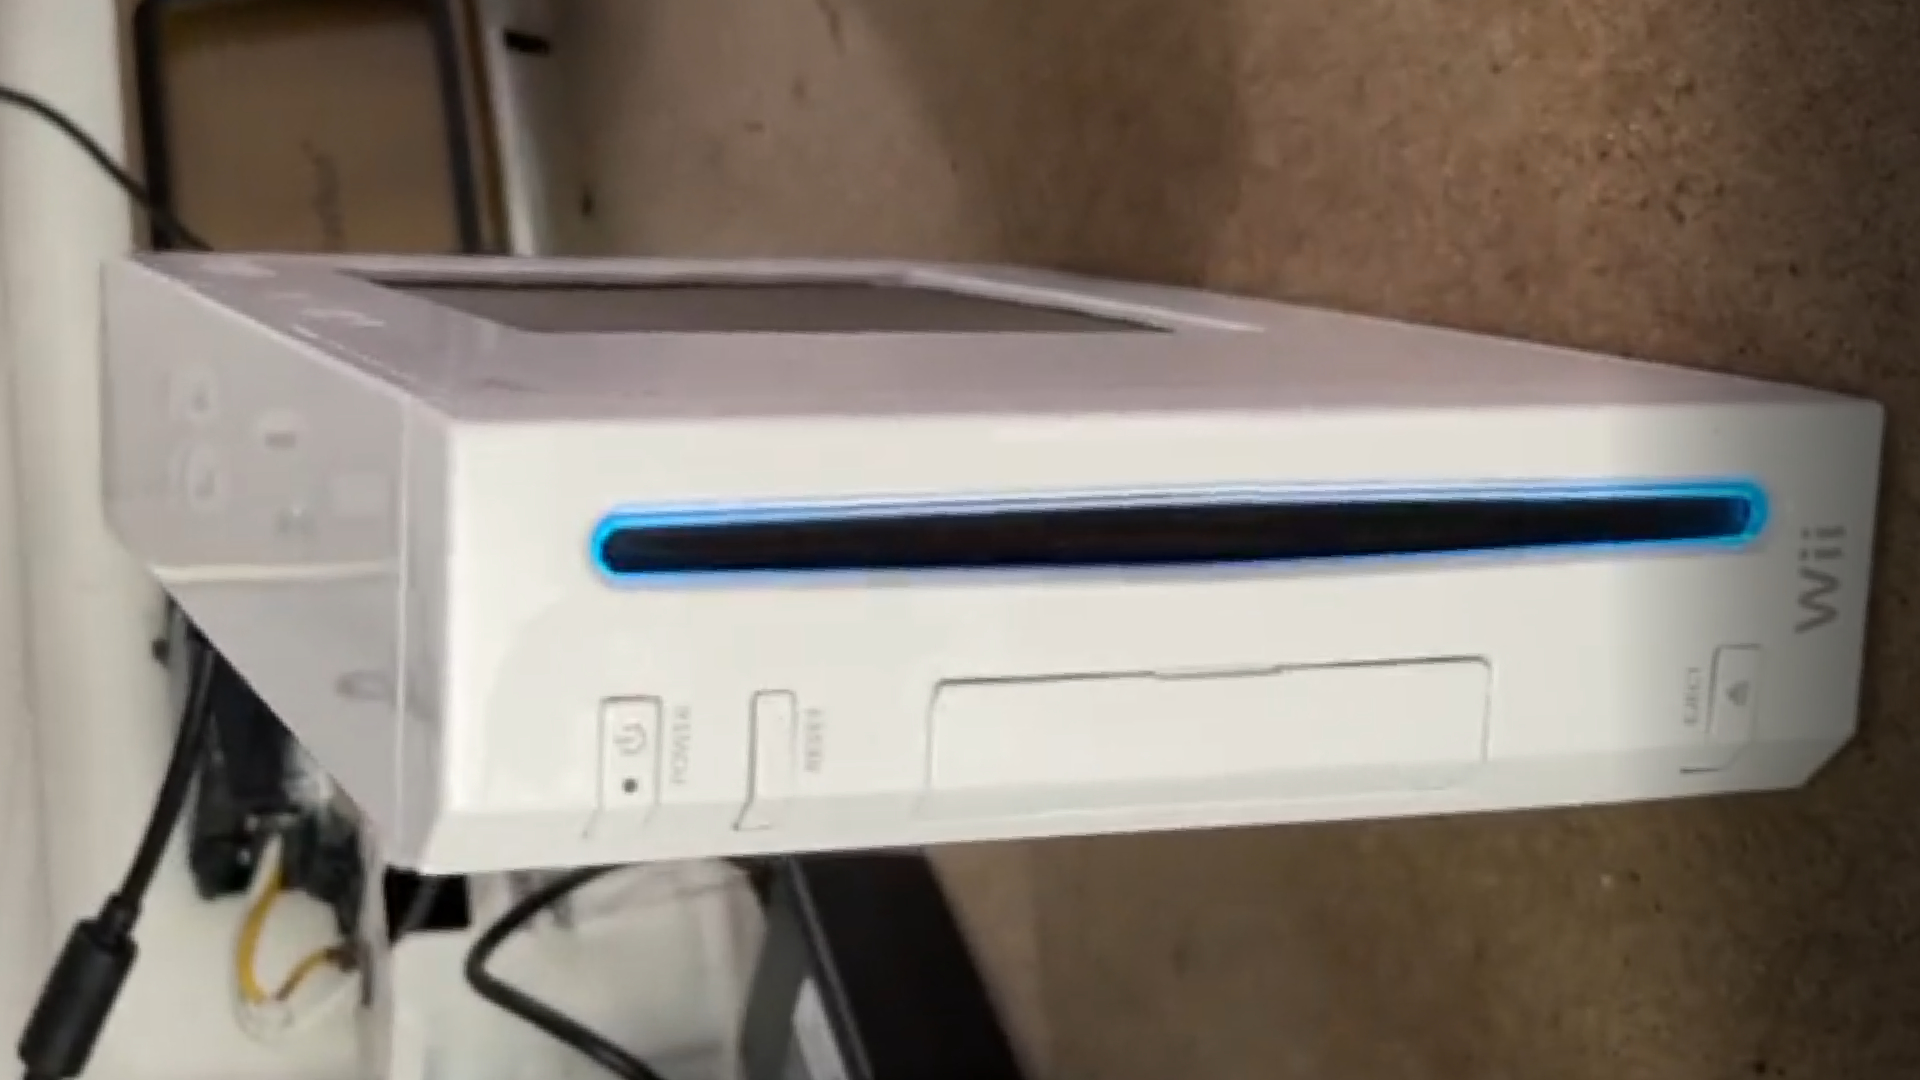 Someone finally built our dream Nintendo Wii gaming PC